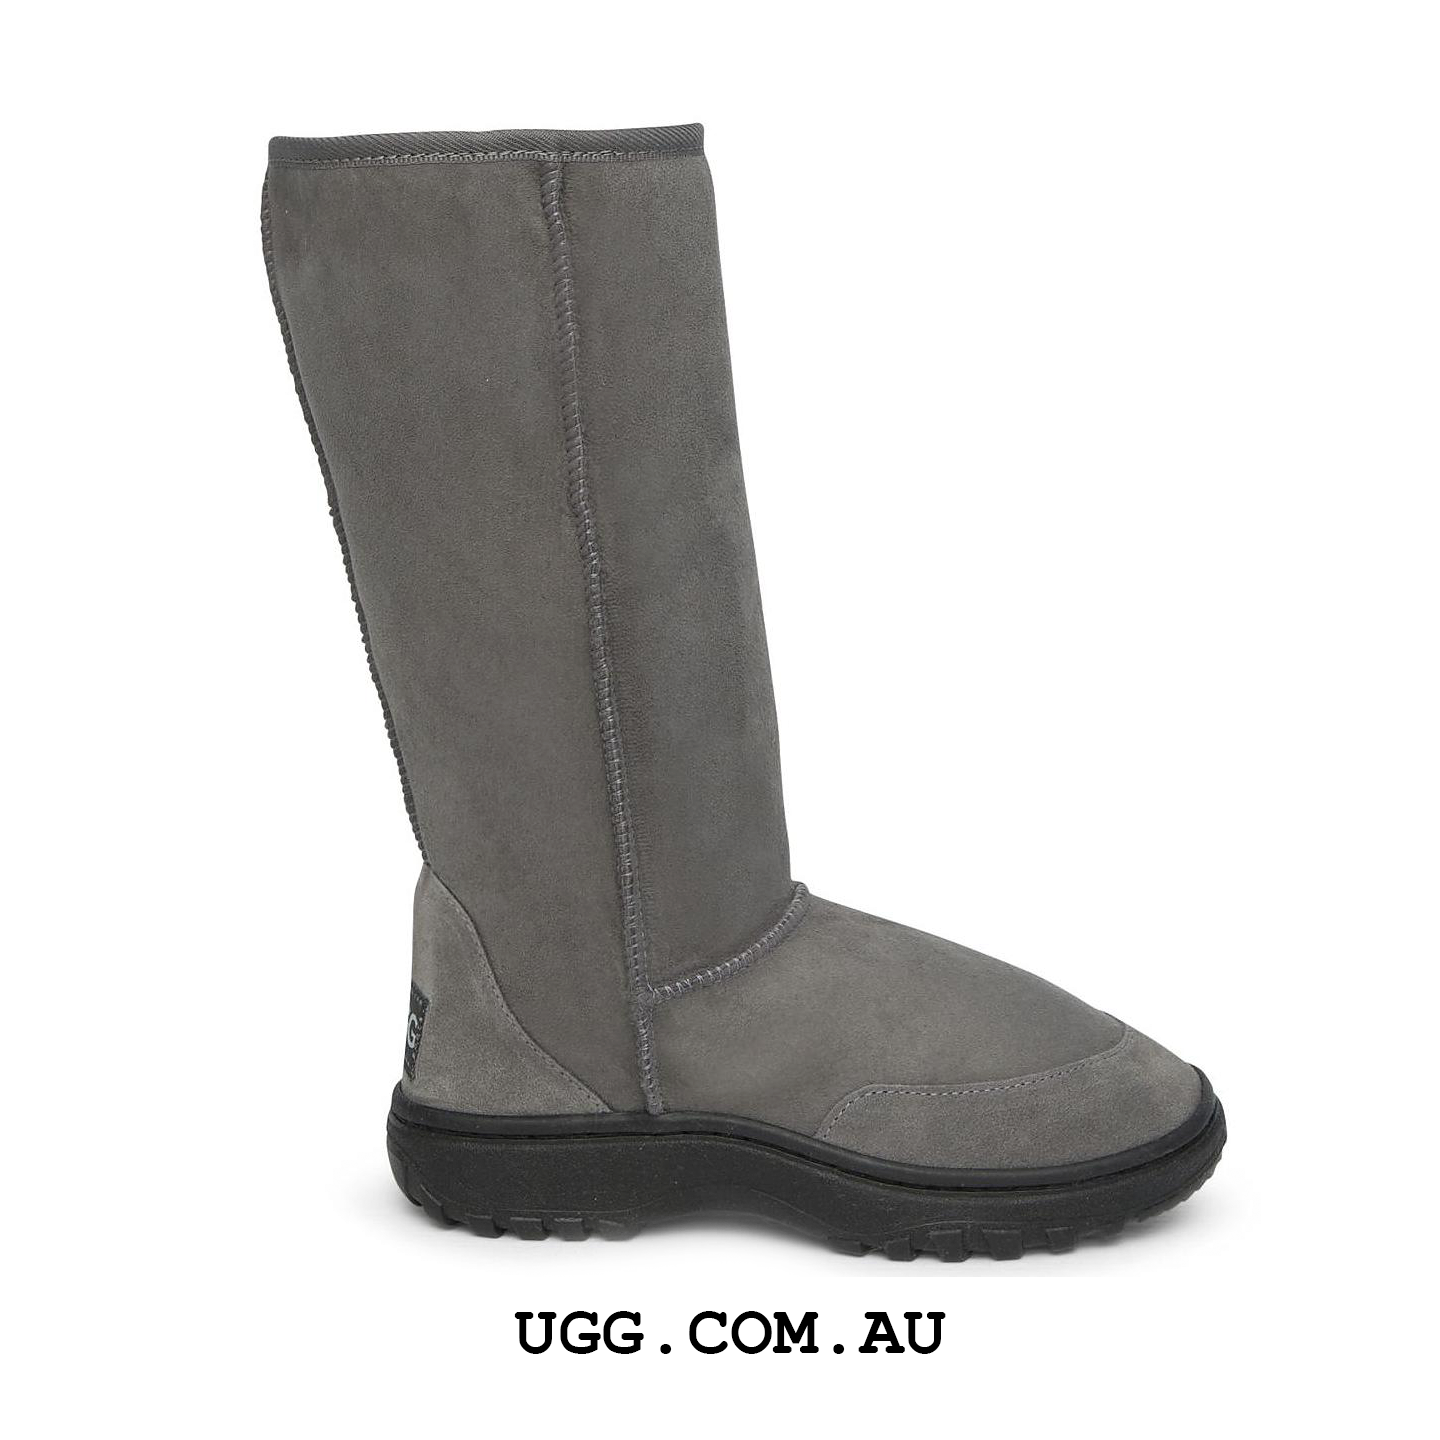 Hiking Tall Lace-up Ugg Boots